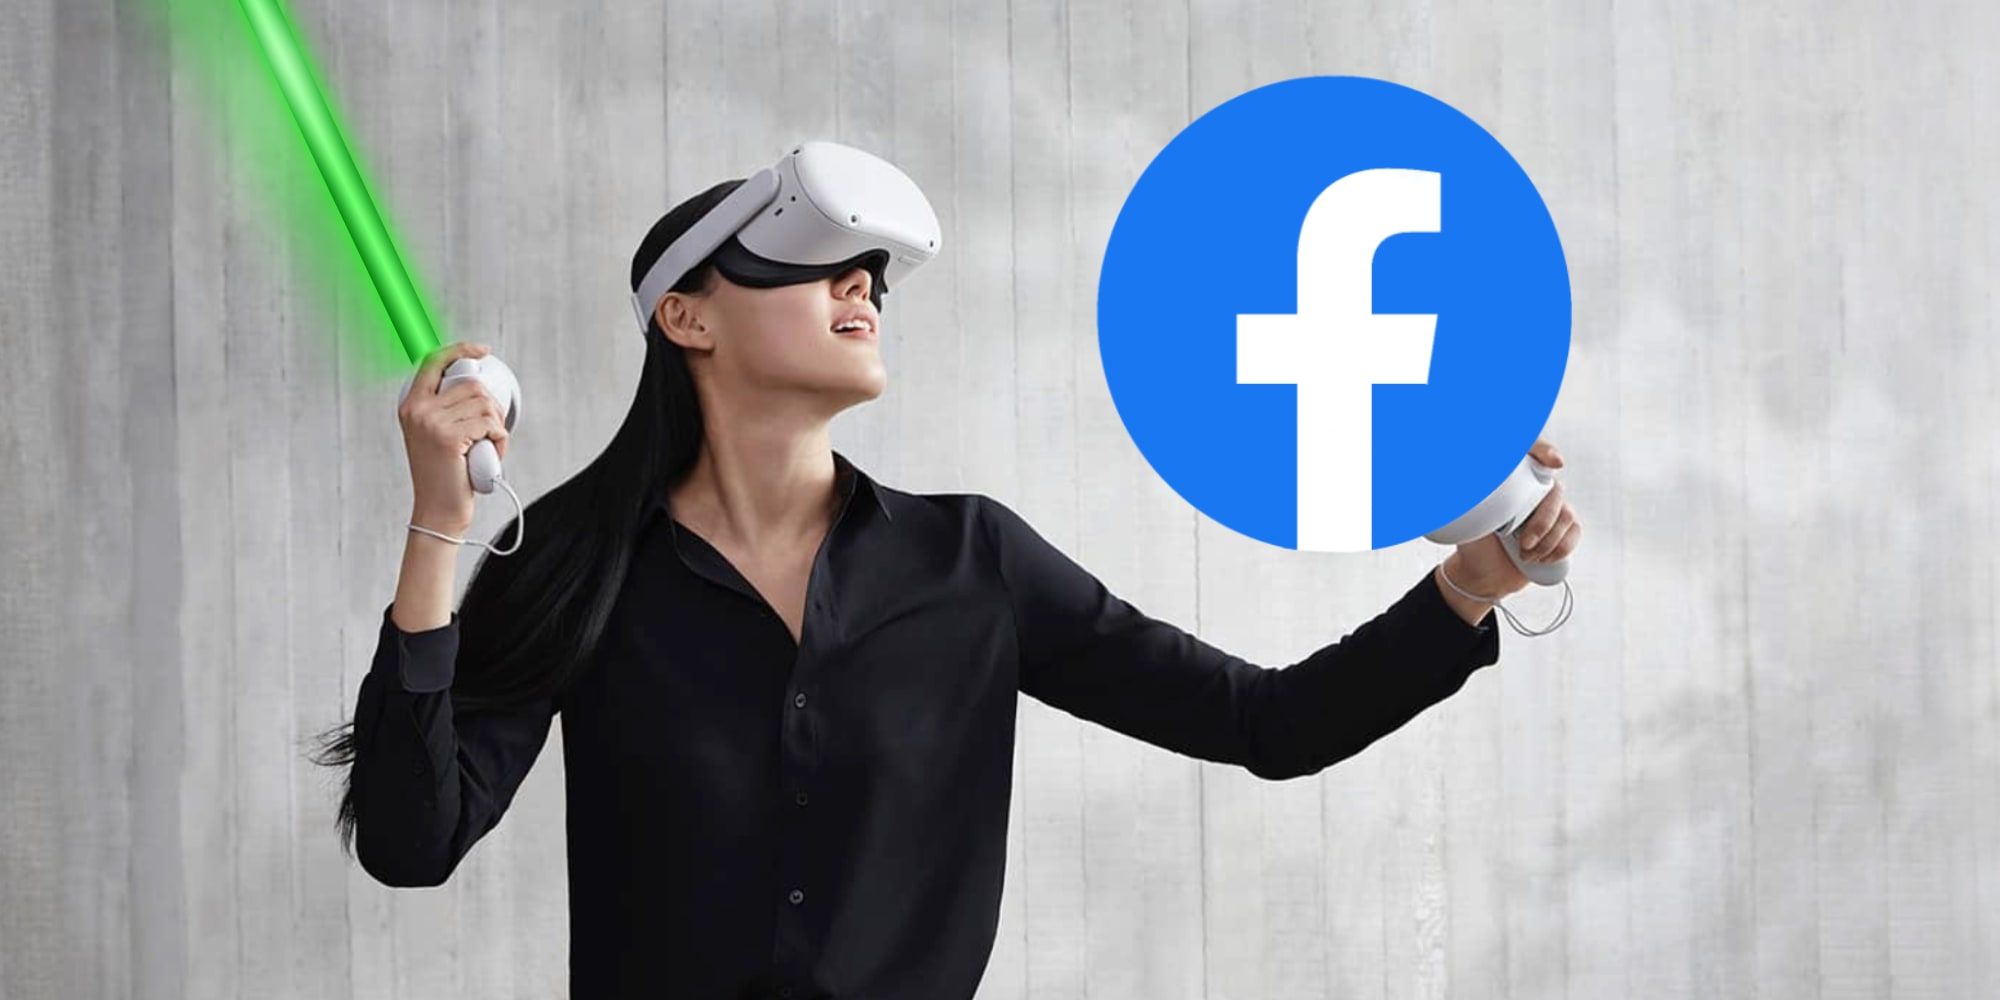 Facebook (Sorry Meta) Wont Require Facebook Login For Oculus VR Headsets